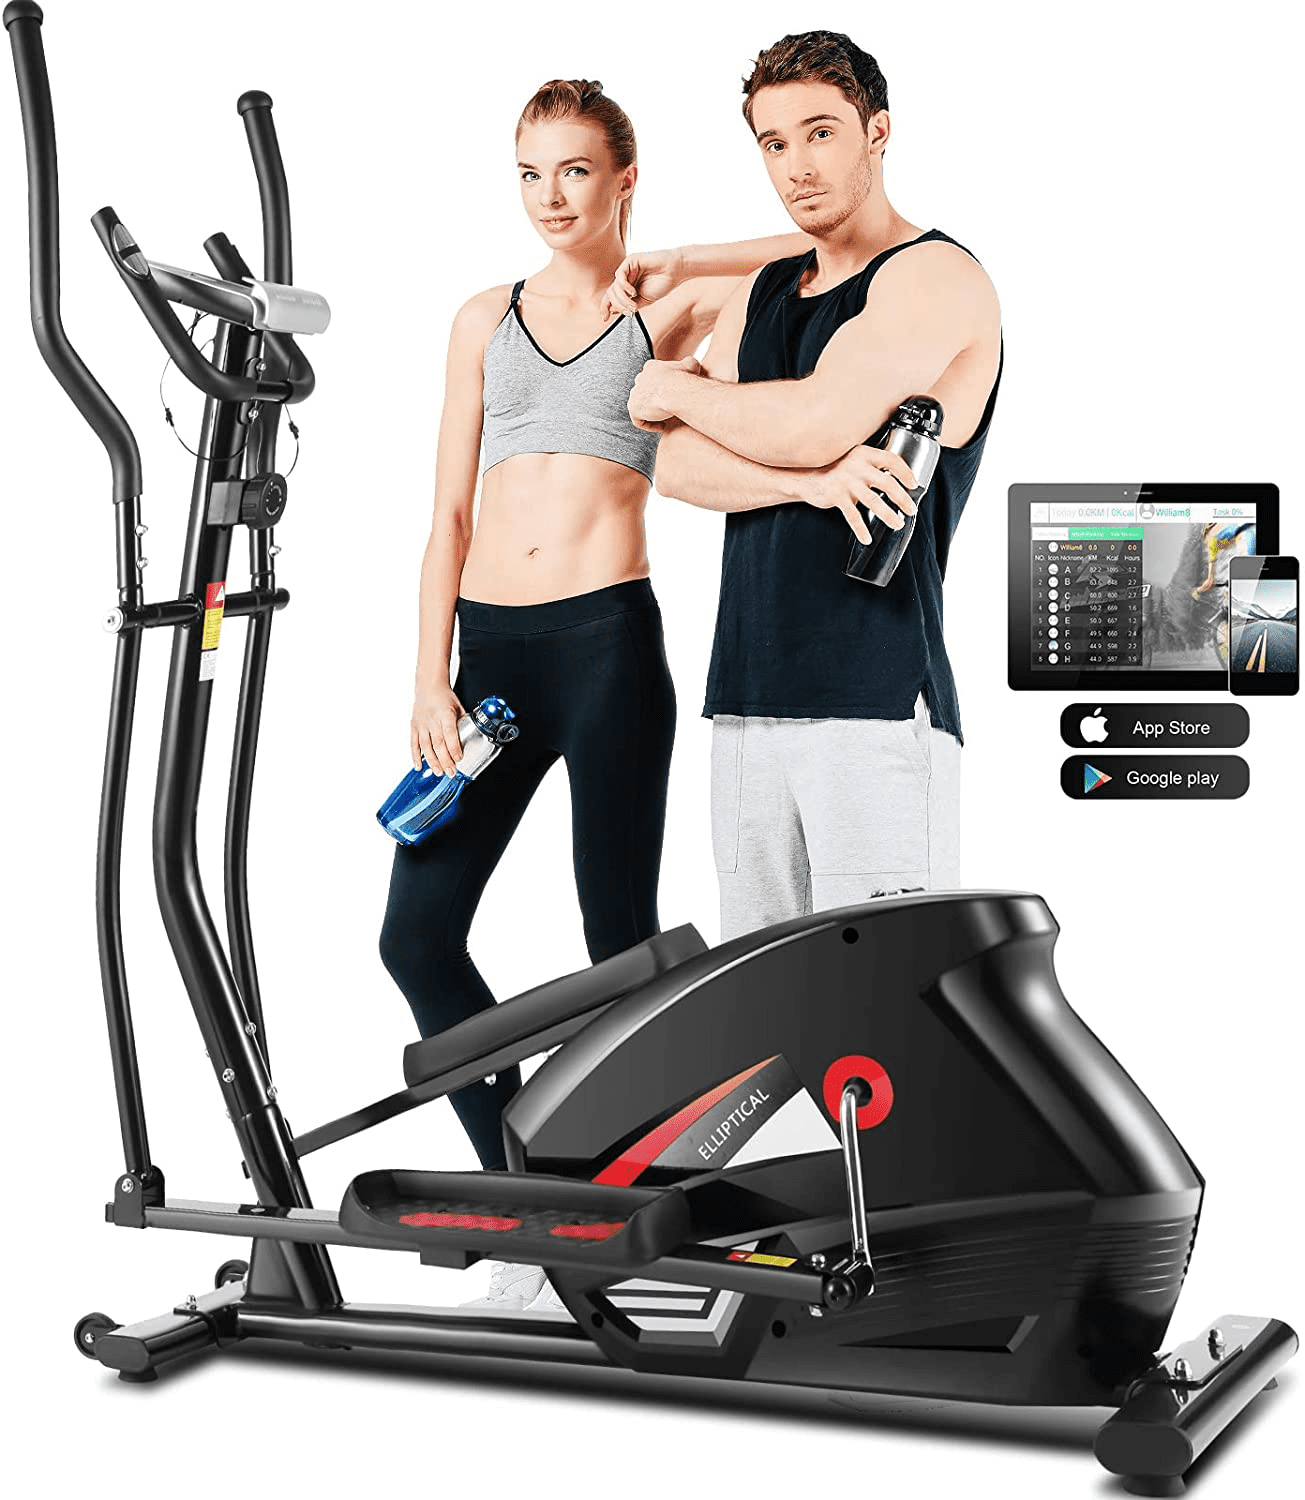 Heart Rate Sensor LCD Monitor Elliptical Machine for Home Use Cardio Cross Trainer with 10-Level Magnetic Resistance 390LB Weight Capacity Exercise Fitness Elliptical Trainers 